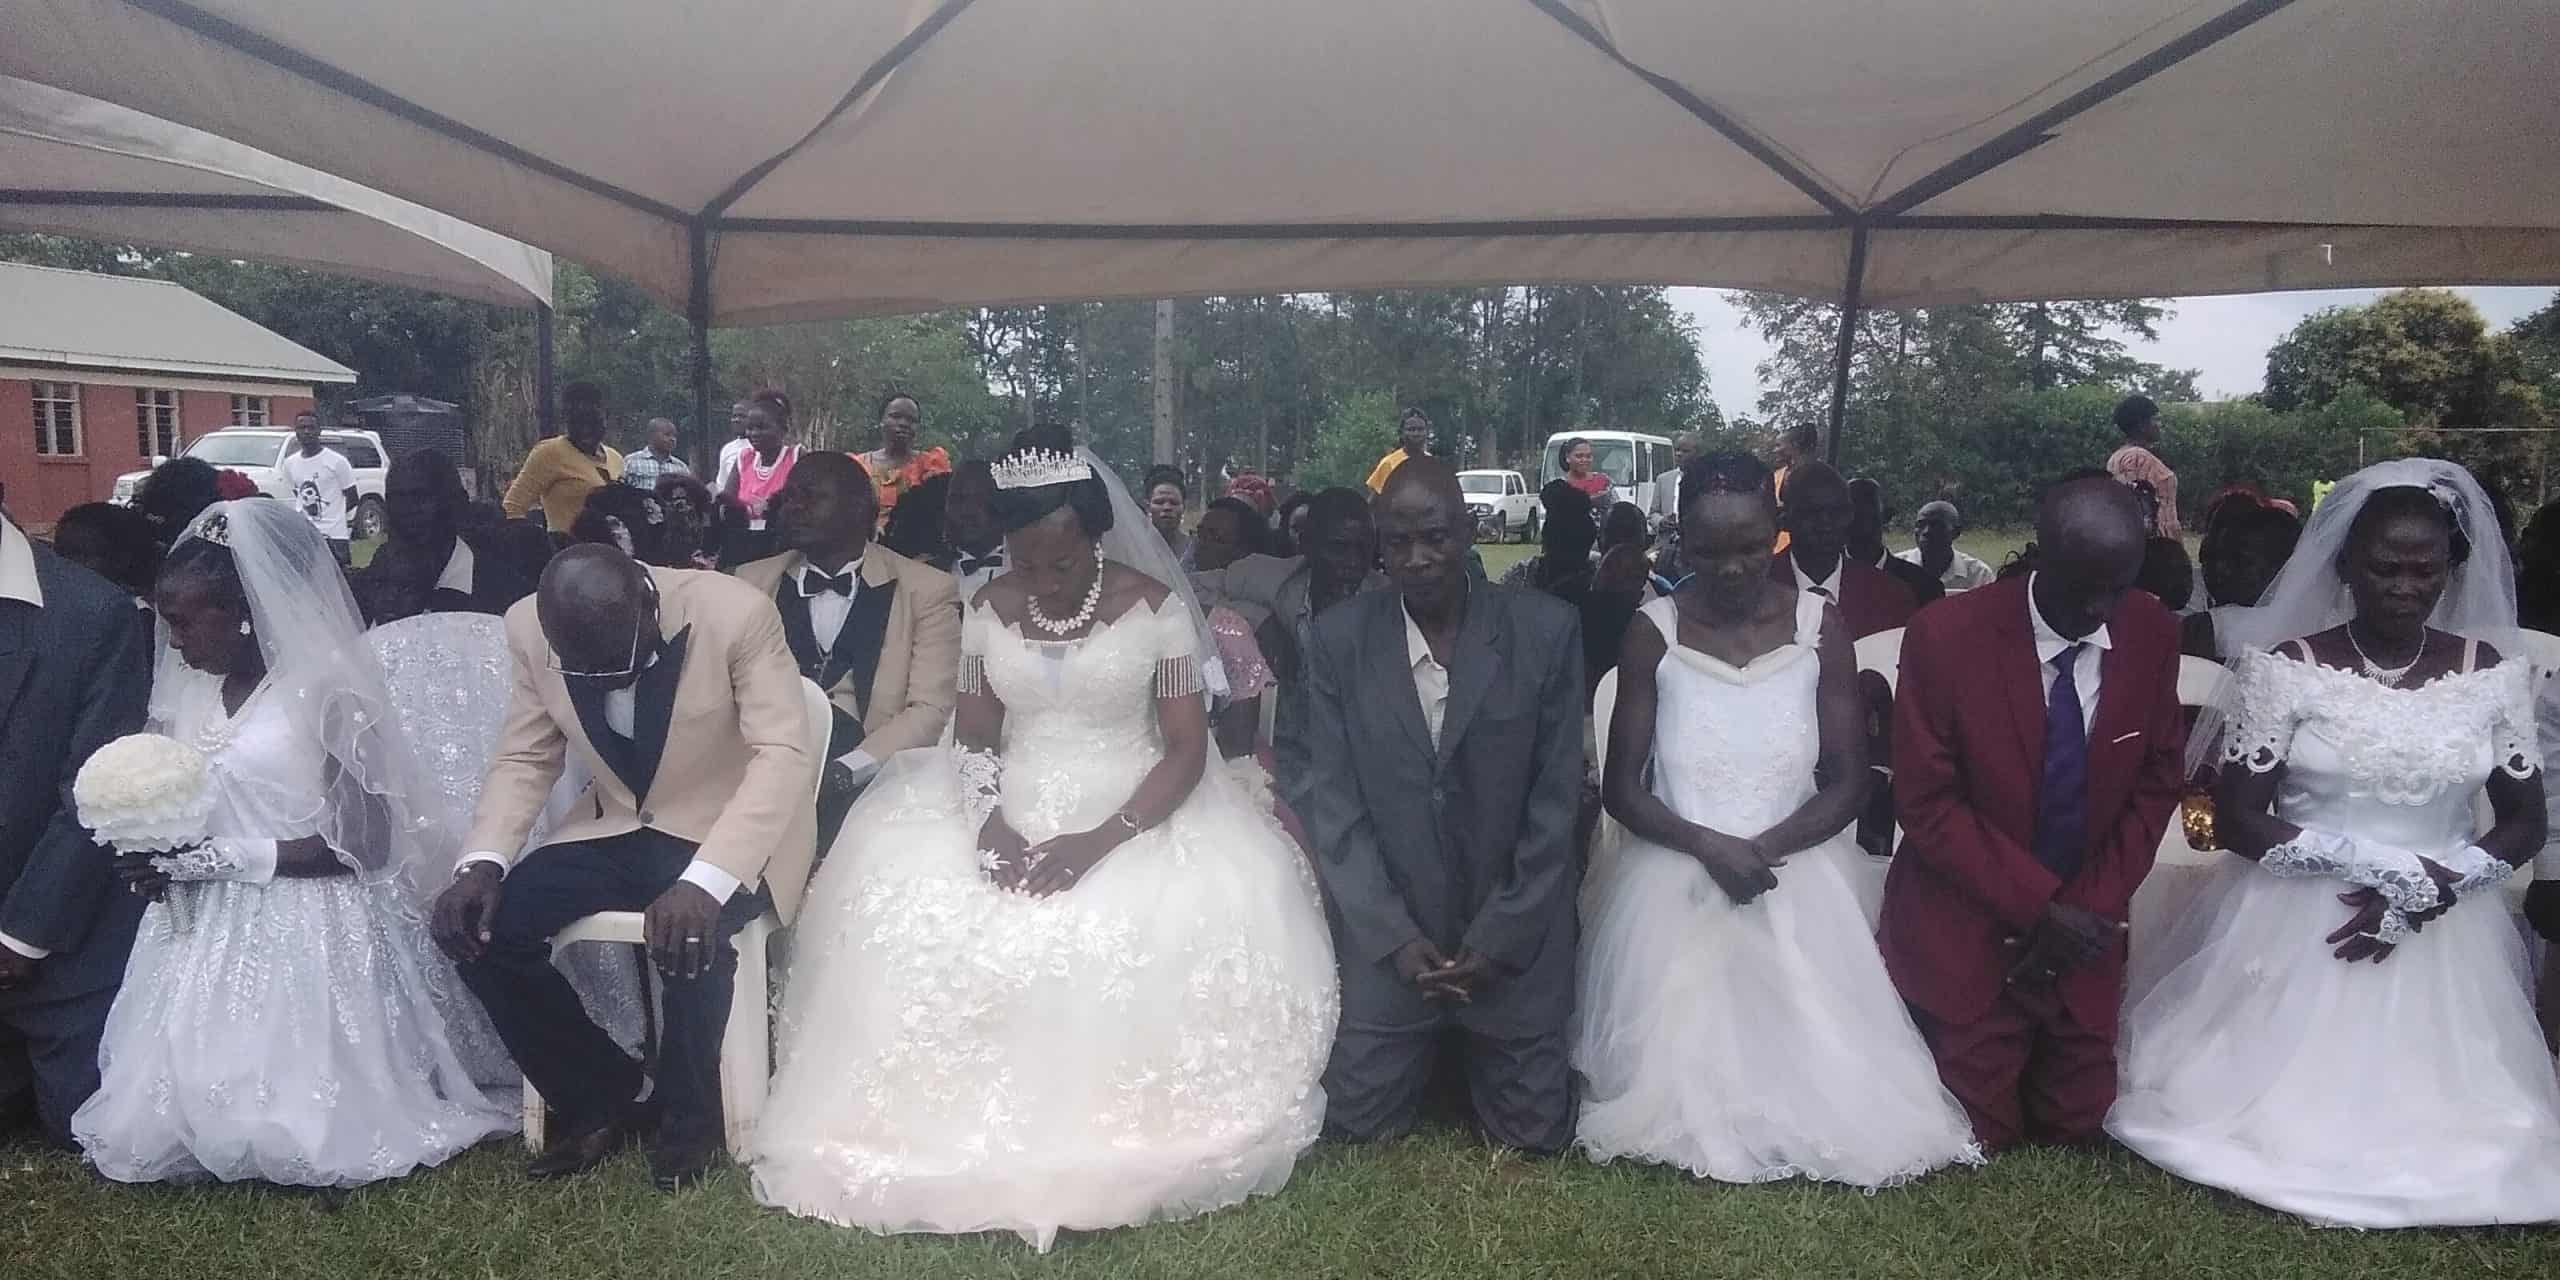 61 couples say “I do” at a mass wedding ceremony in Malaba Busia. | KenyanStory